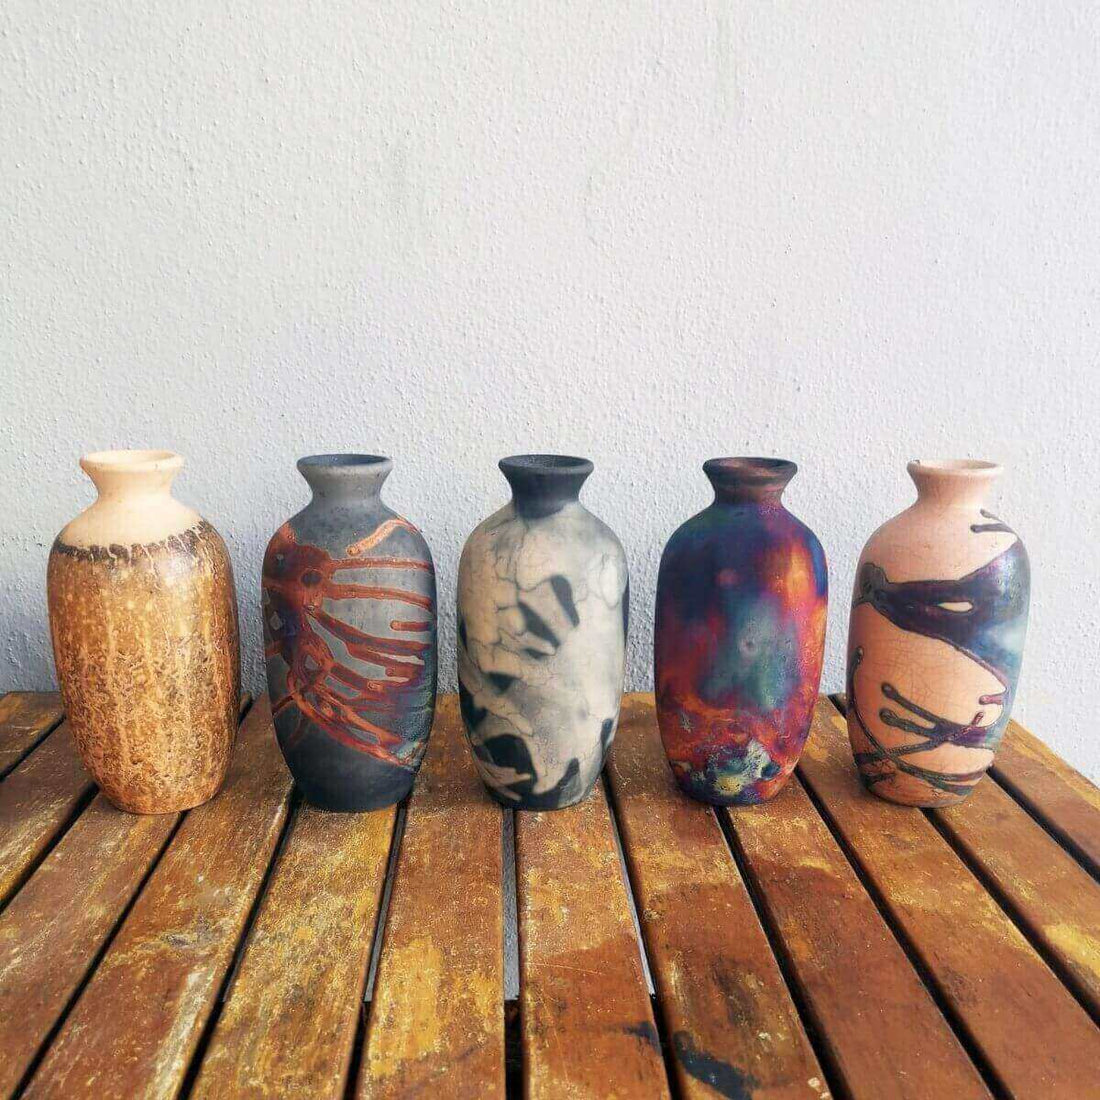 A quick guide on the 6 different Raku fired pottery vase finishes - RAAQUU